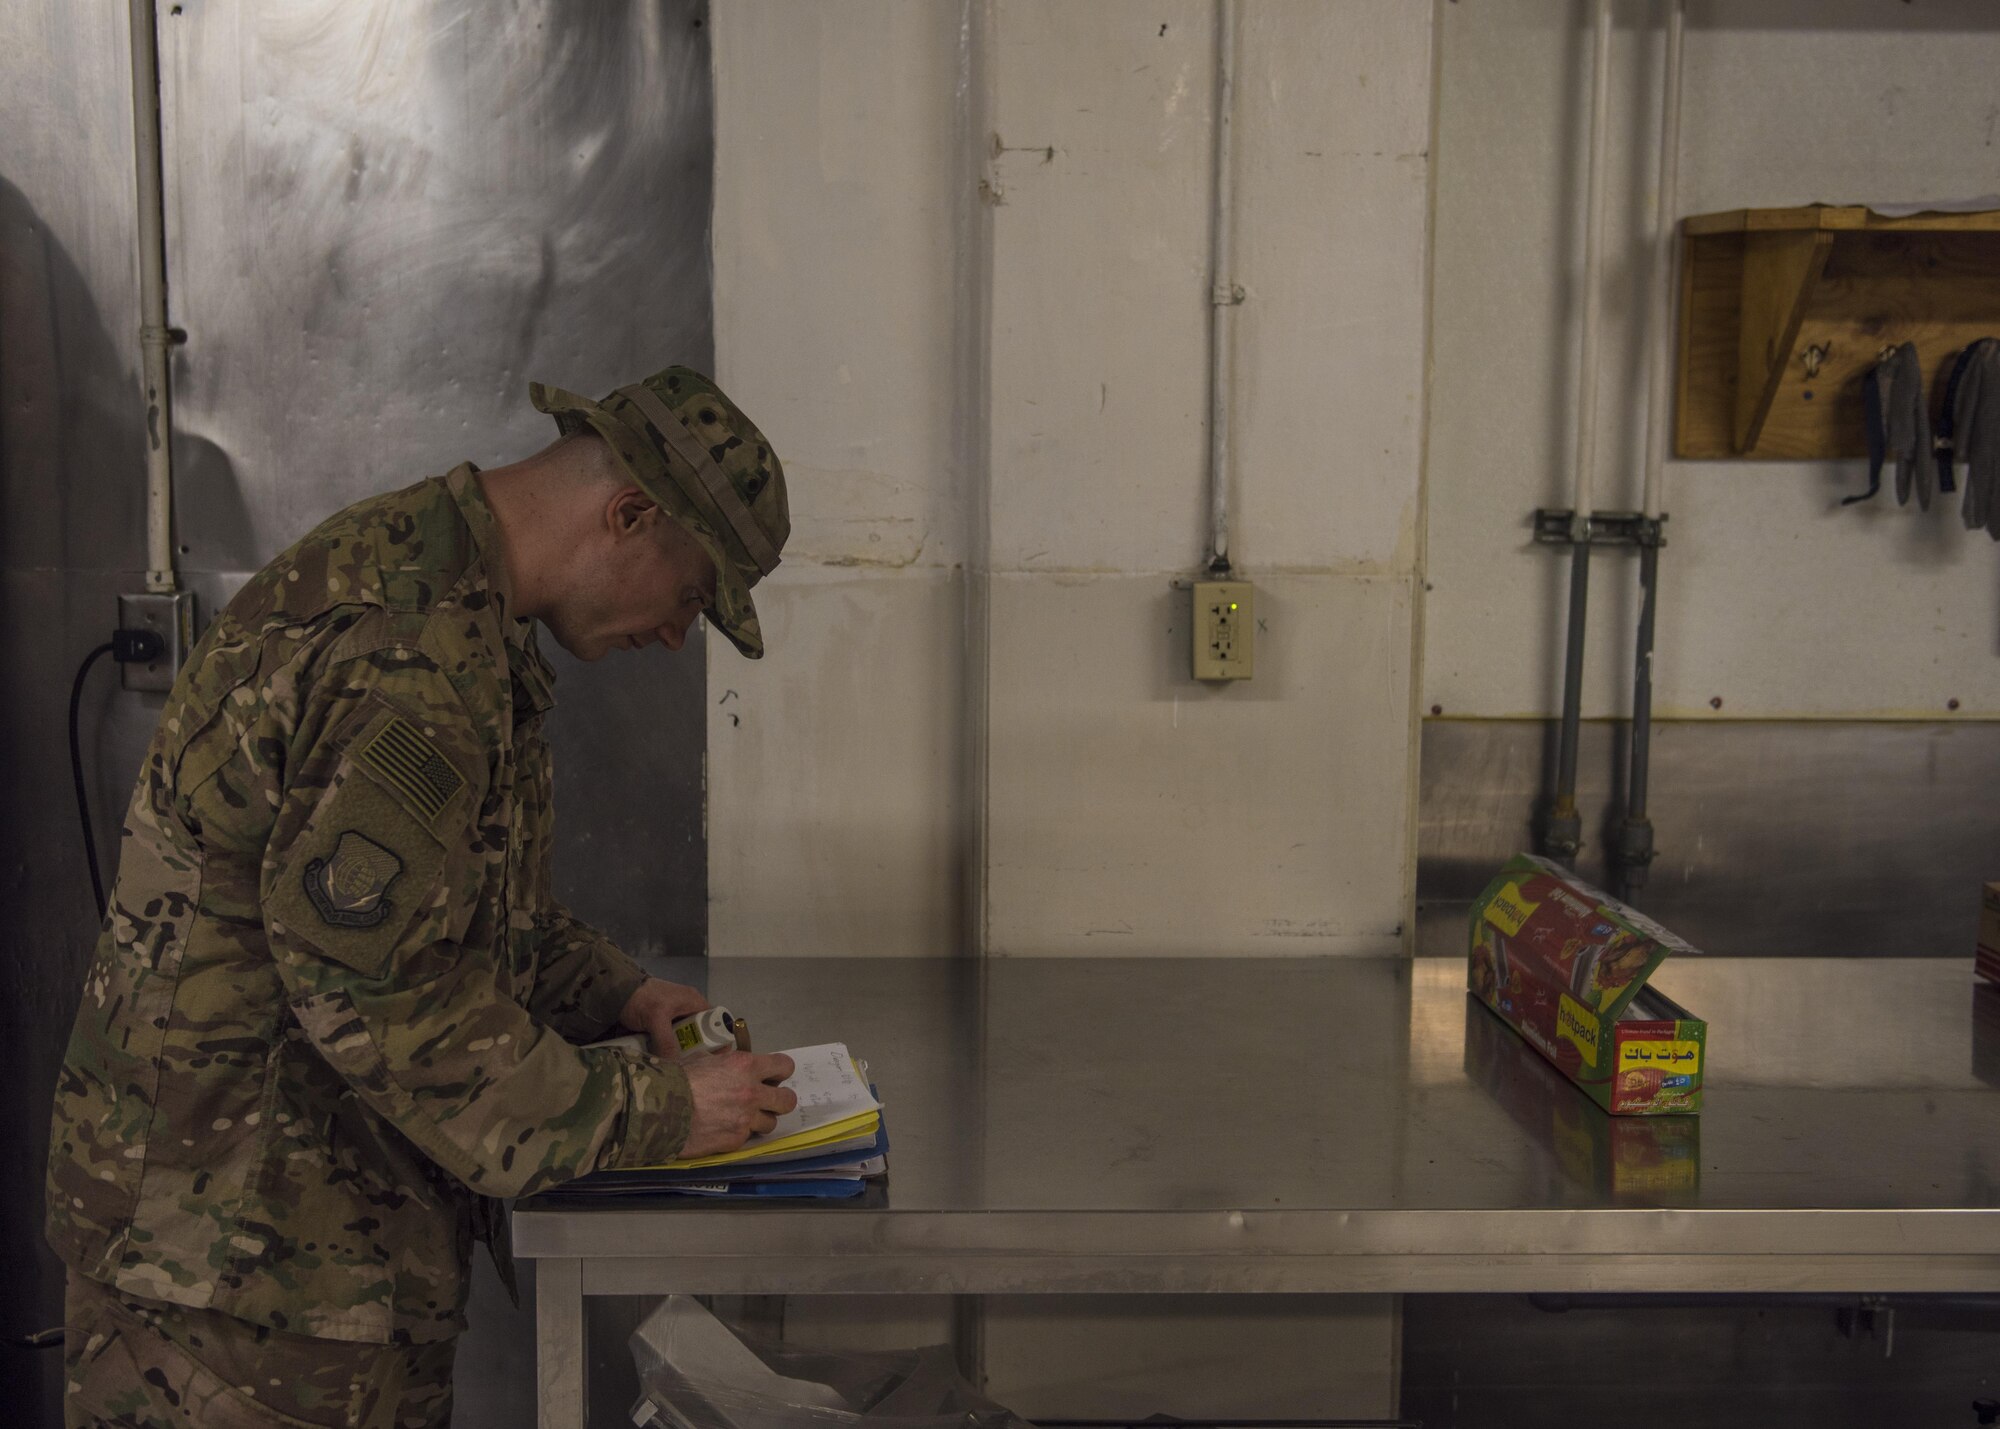 Tech Sgt. Rusty Thomas, 455th Expeditionary Medical Group public health technician, takes notes, Bagram Airfield, Afghanistan, July 21, 2016. Thomas randomly inspects the dining facilities on base once a month to confirm food preparation and handling are conducted to health code standards. (U.S. Air Force photo by Senior Airman Justyn M. Freeman)